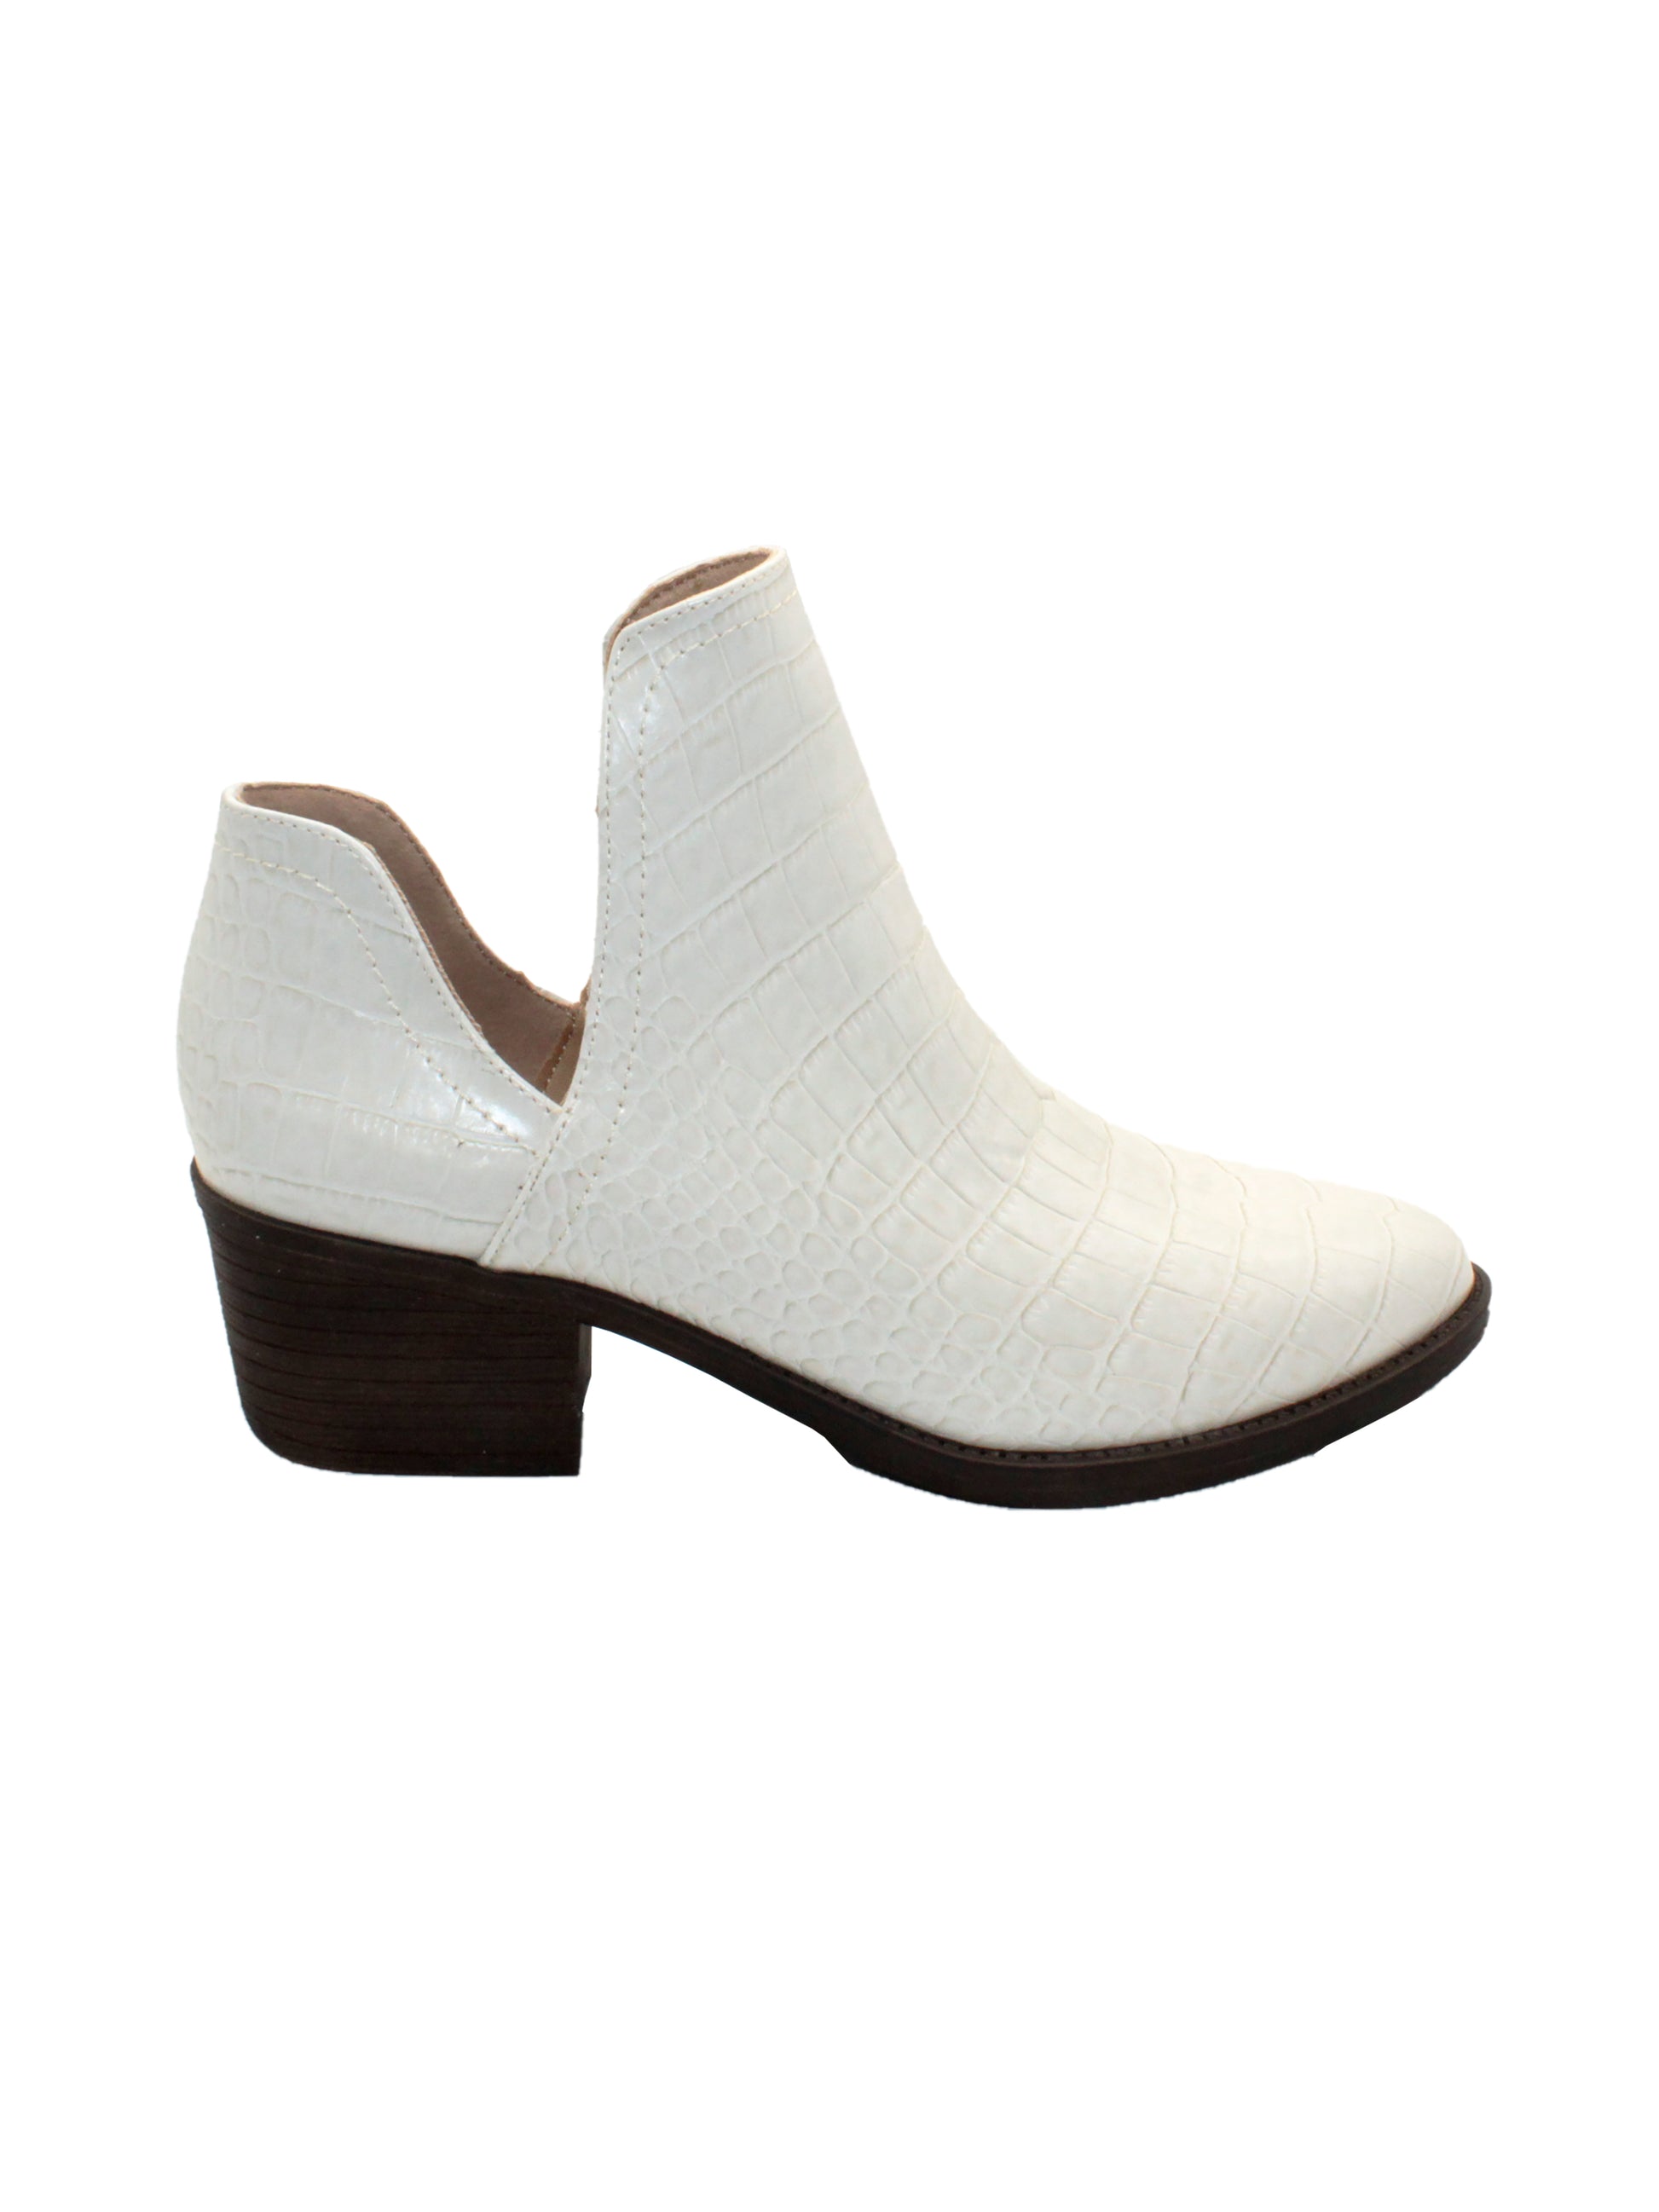 Our fan favorite bone croco CHRONICLE bootie by Volatile has been crafted in exotic materials, embossed faux croco or multicolored faux snake, for the new fall season. The upper features an attractive open shank that complement dresses and jeans alike. side 